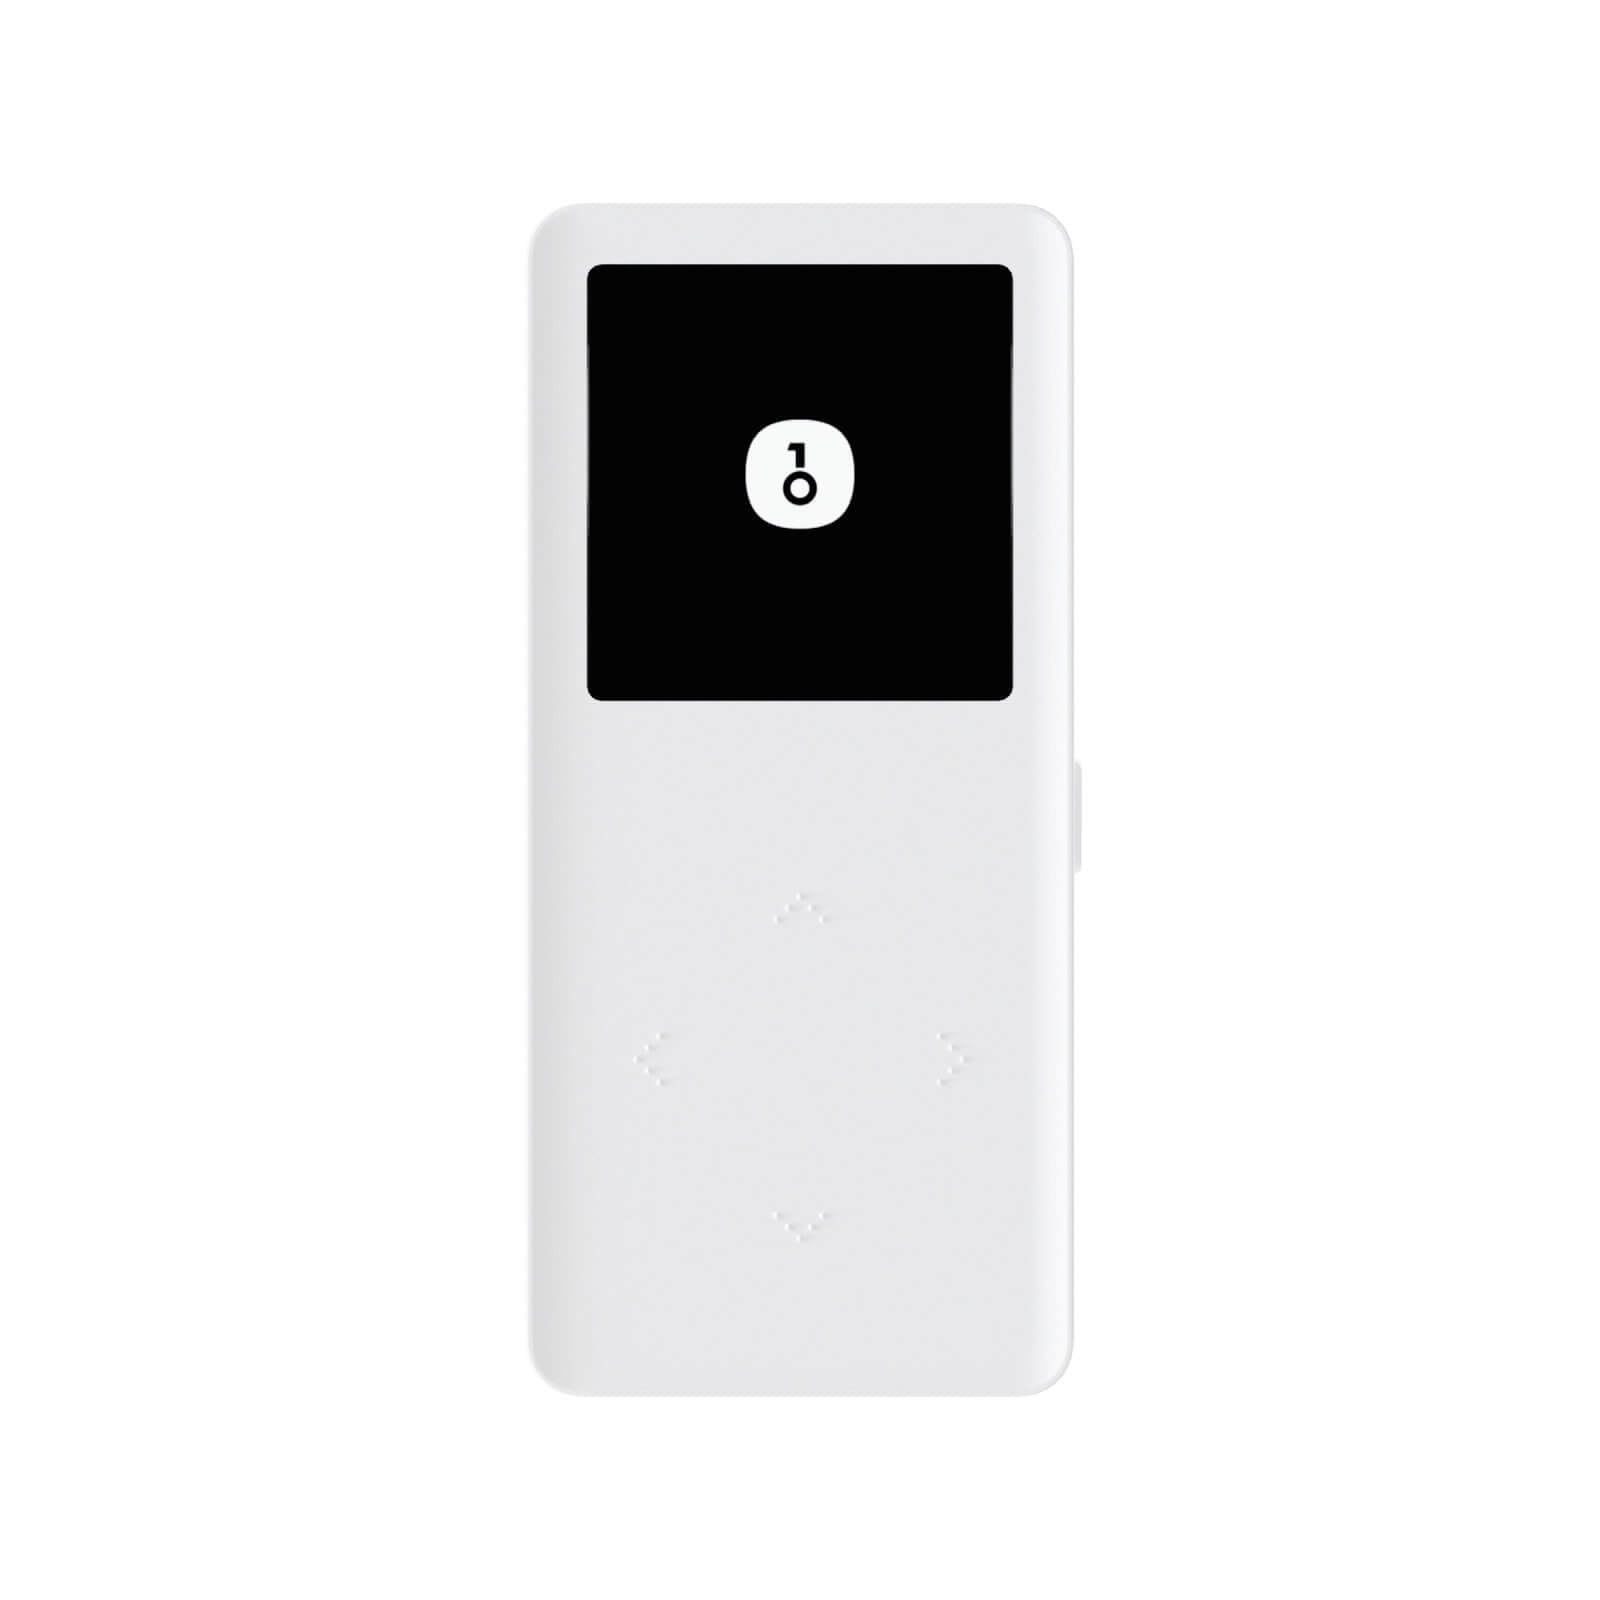 Frontal view of a white OneKey Mini standing upright with its screen displaying the OneKey logo.